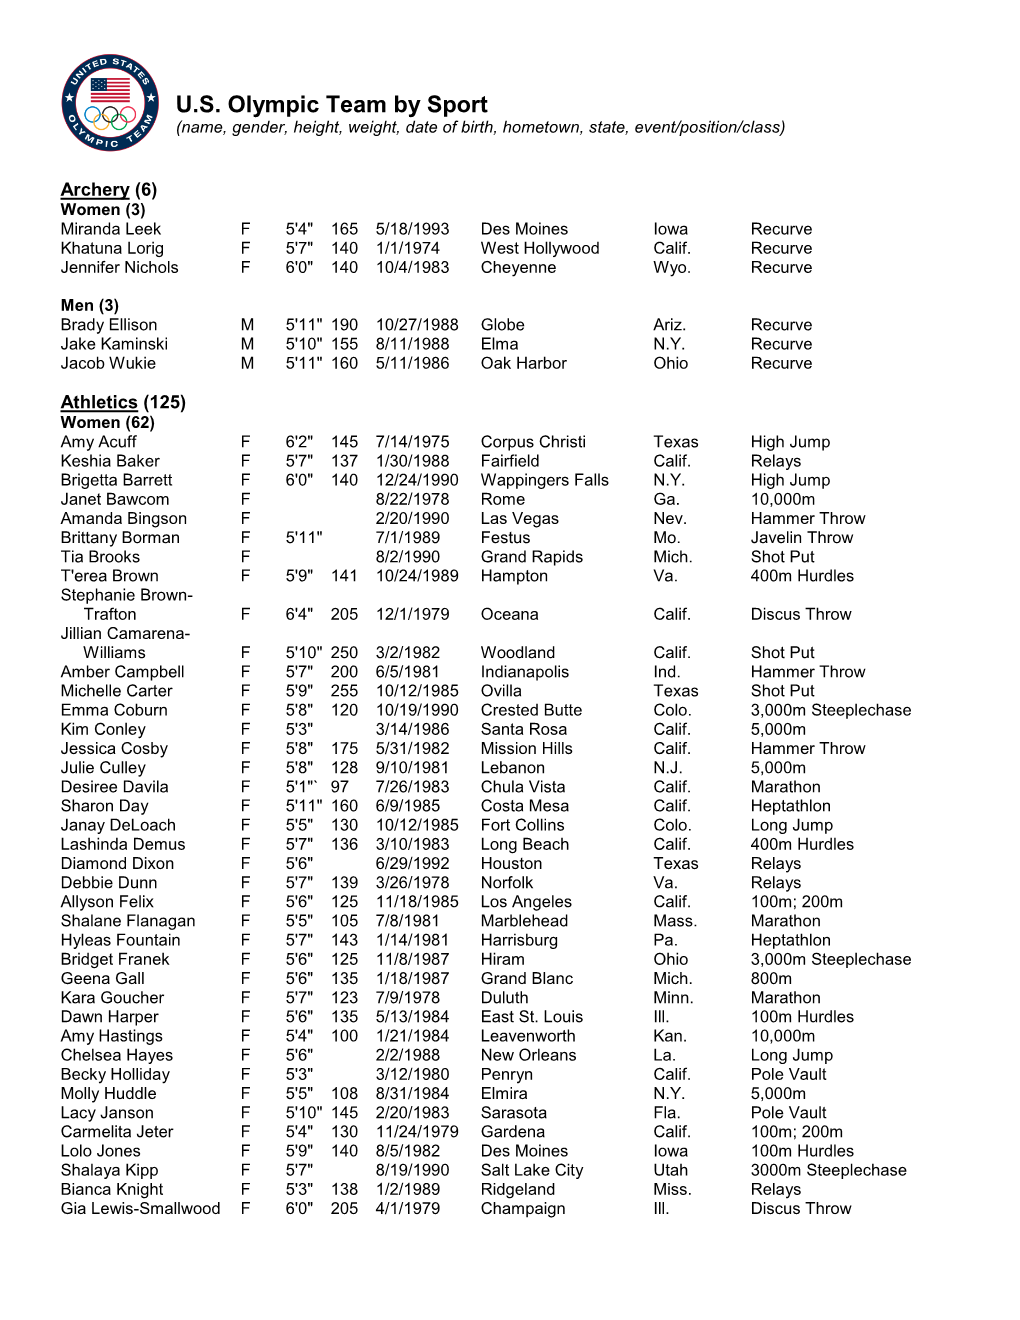 Team USA Olympic Roster by Sport